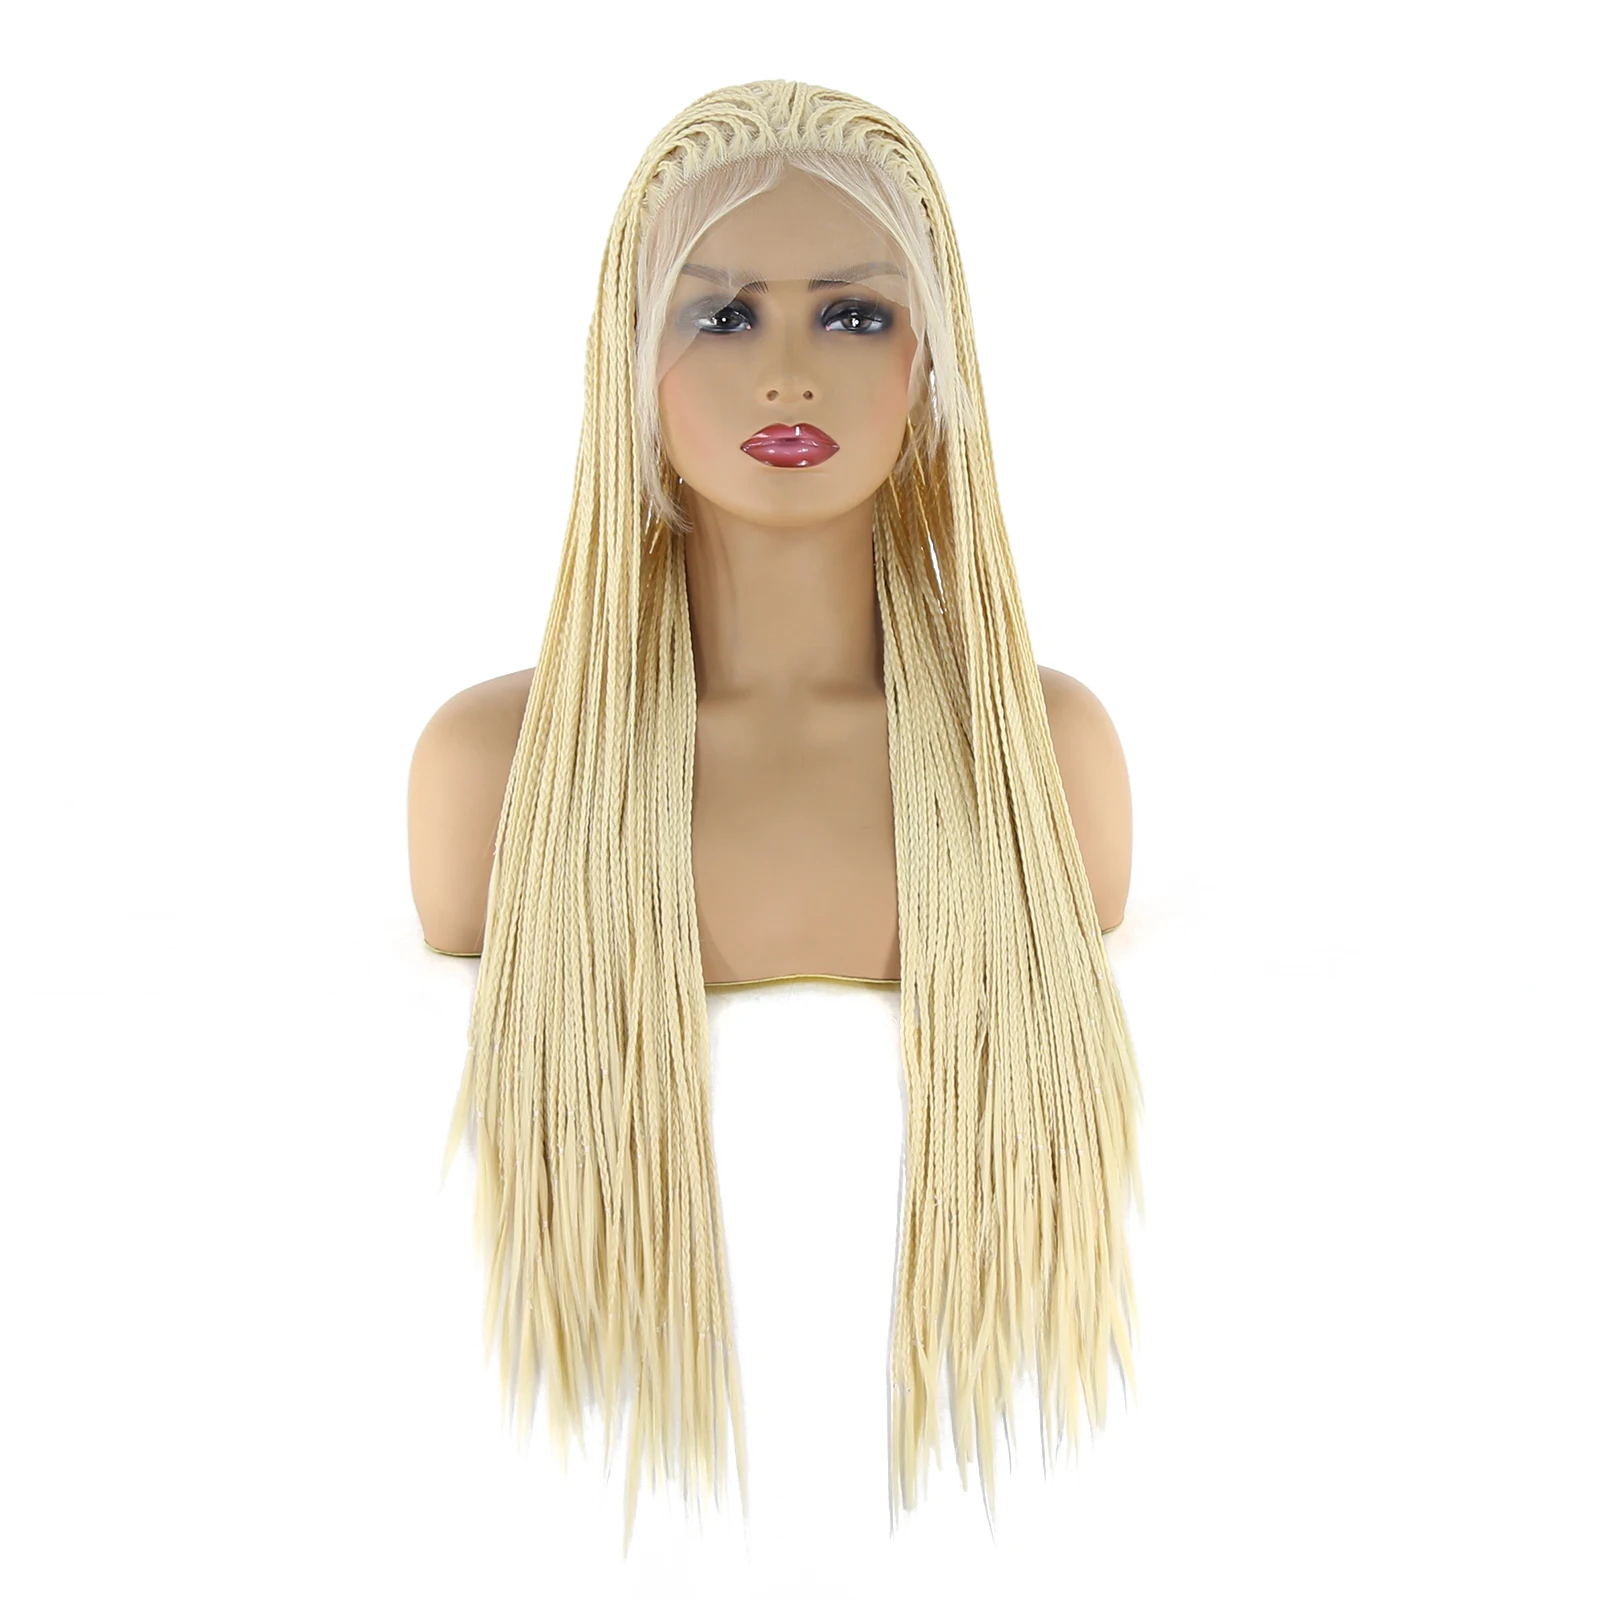 BTWTRY Blonde Braided Wigs for Black Women African American #613 Box Braided Long Synthetic Lace Front Wig Heat Resistant Fiber